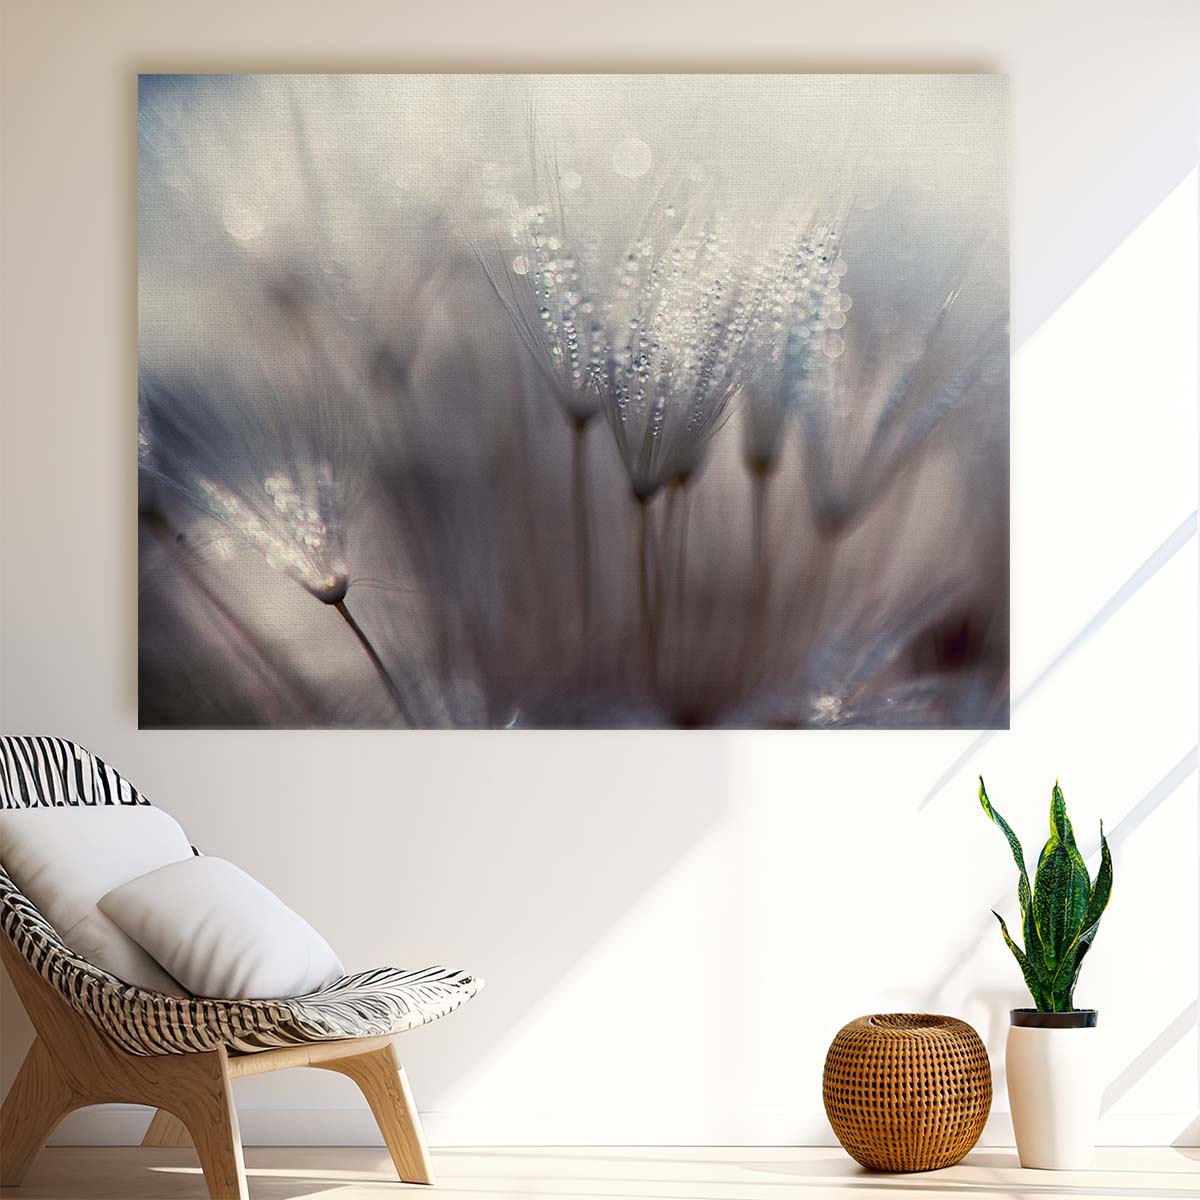 Delicate Dandelion Dewdrop Macro Floral Wall Art by Luxuriance Designs. Made in USA.